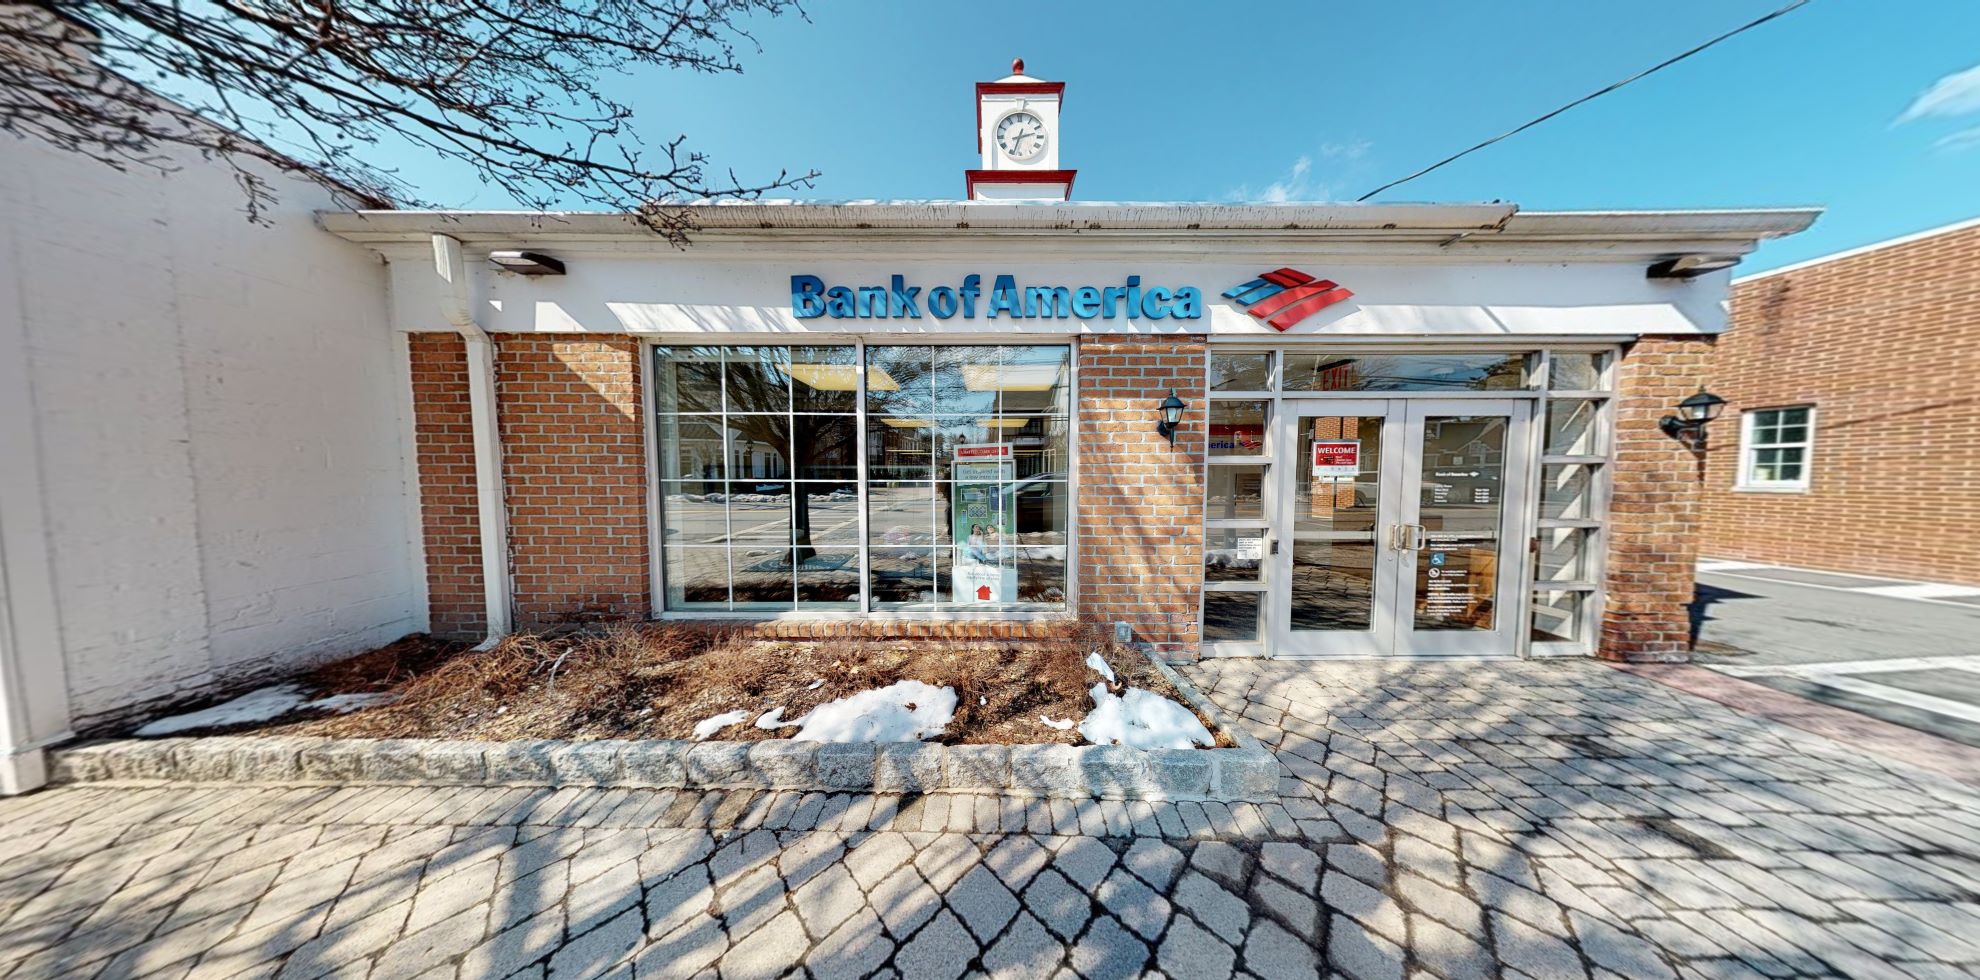 Bank of America financial center with drive-thru ATM | 401 Main St, Armonk, NY 10504